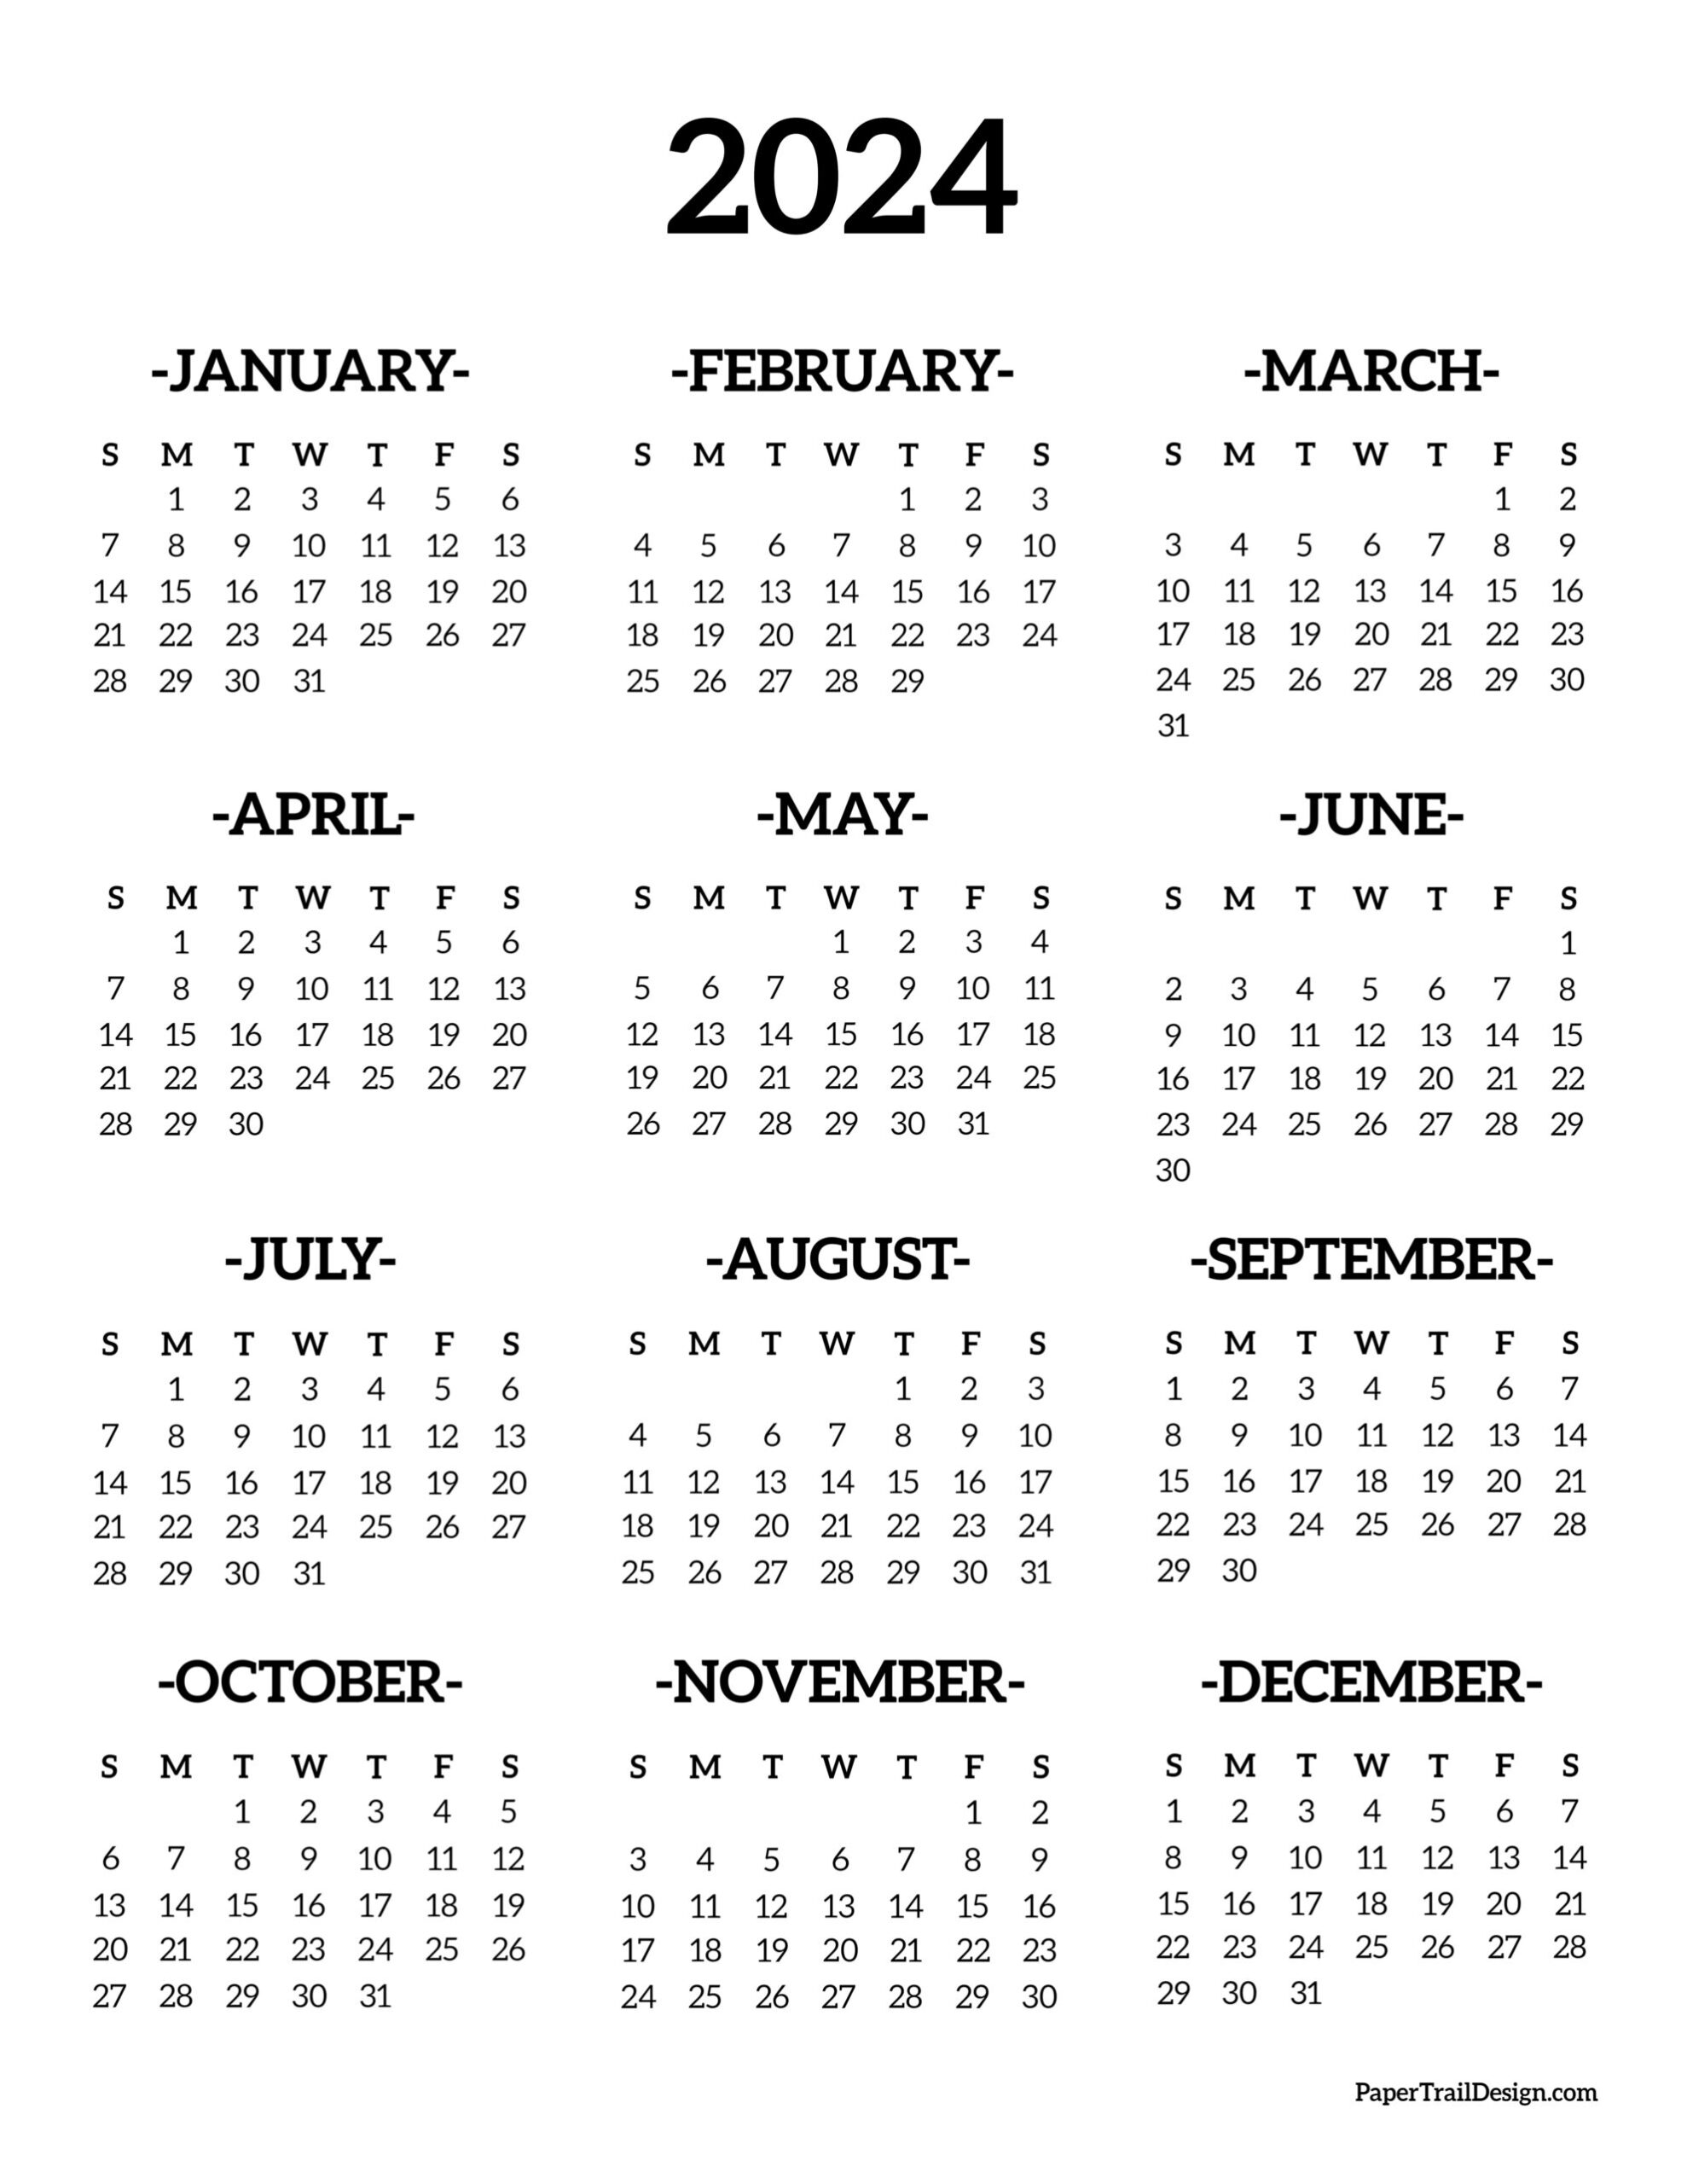 Calendar 2024 Printable One Page - Paper Trail Design for Free Printable 2024 Calendar One Page